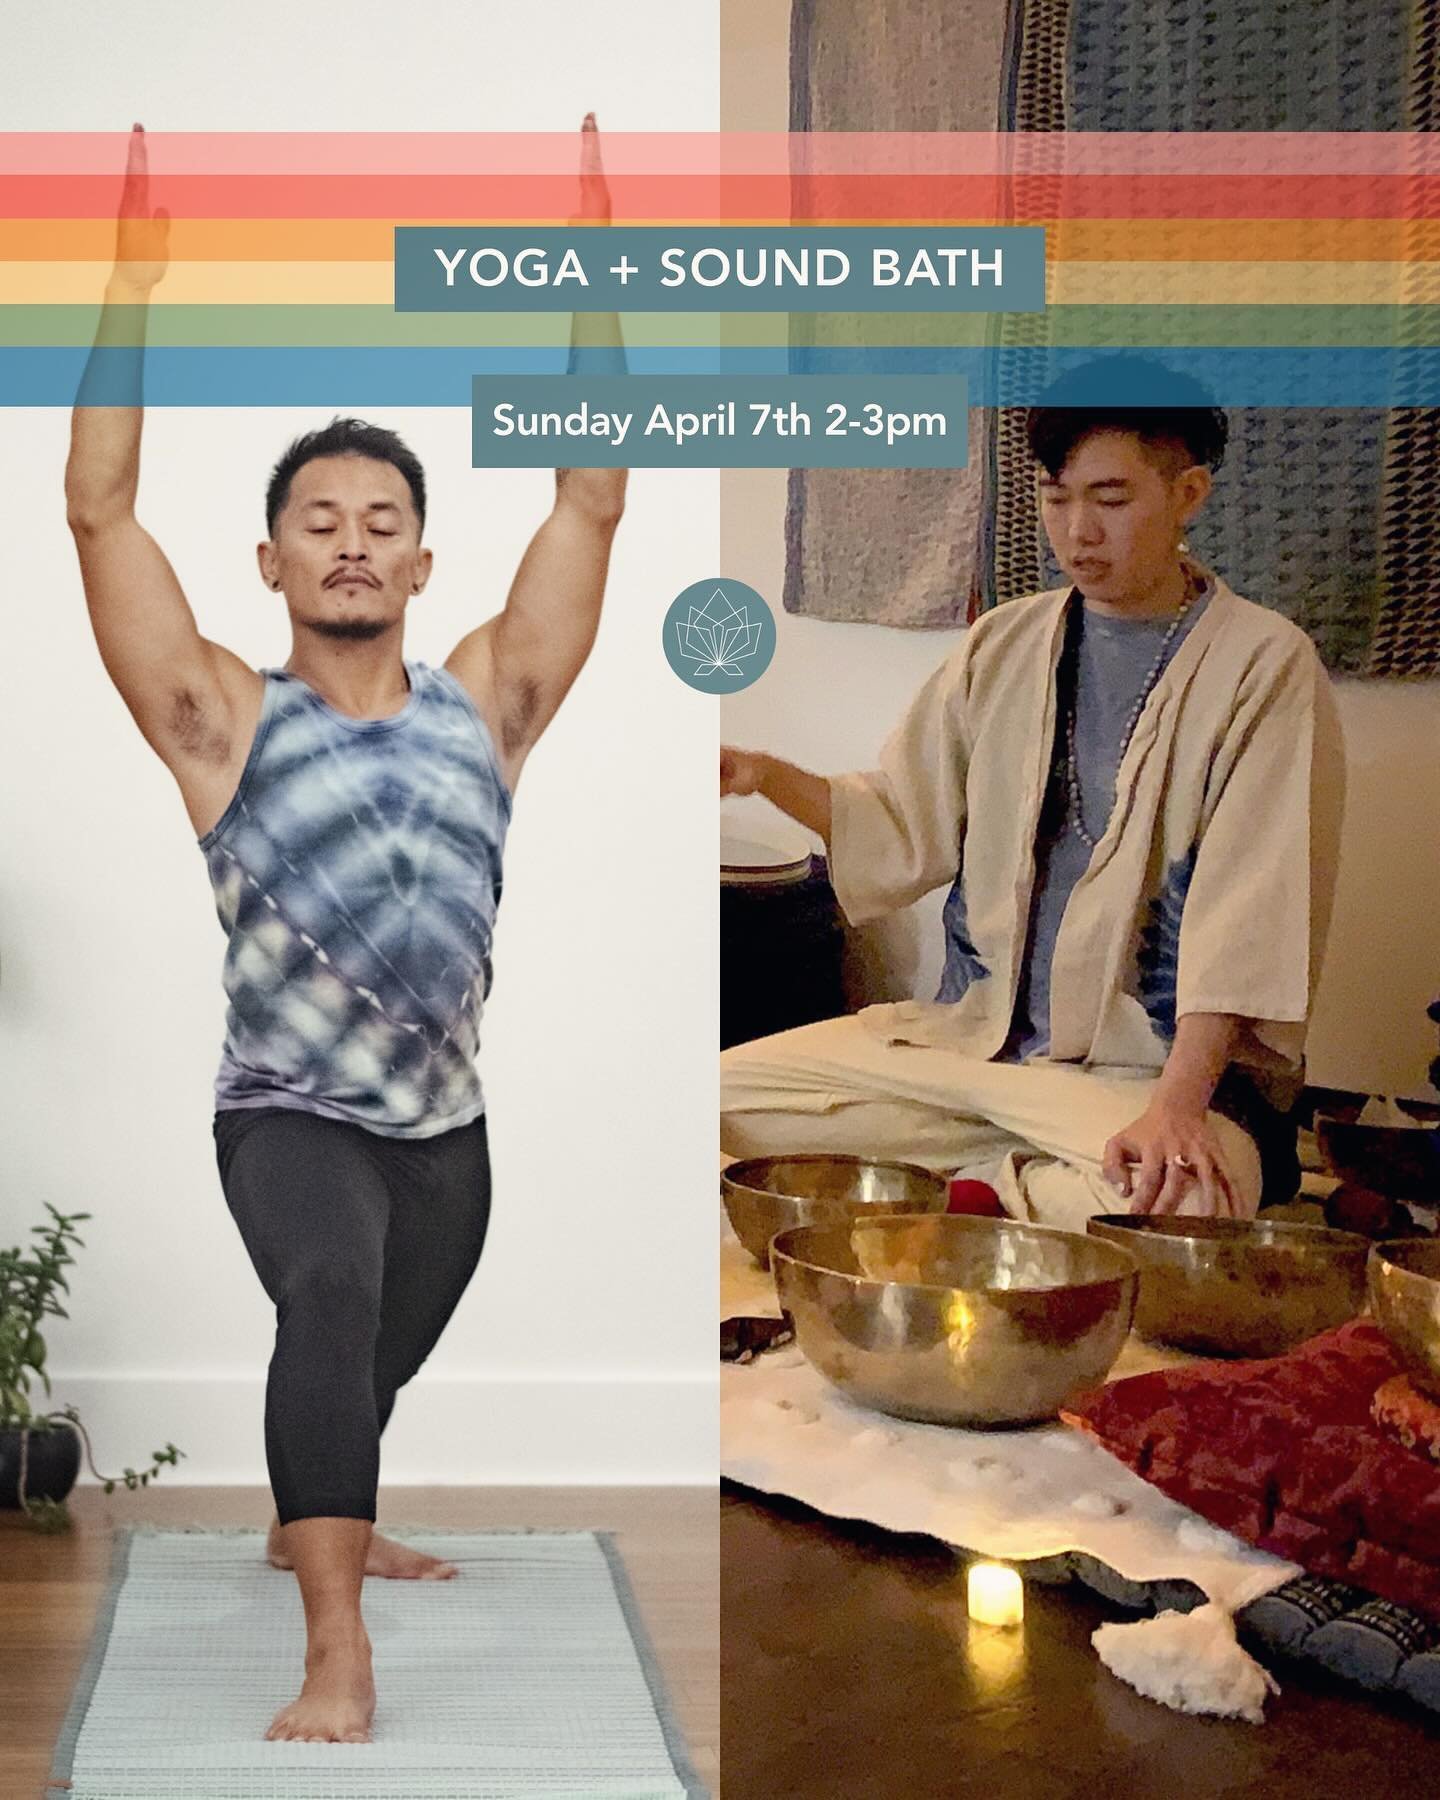 Queer Yoga Sunday

I&rsquo;m excited to share that a special guest will be joining us for queer focused yoga this Sunday at @nowyoga_pdx! 

Ocean @yasstohealing will take us through an earth grounded sound bath for an extra long savasana at the end o